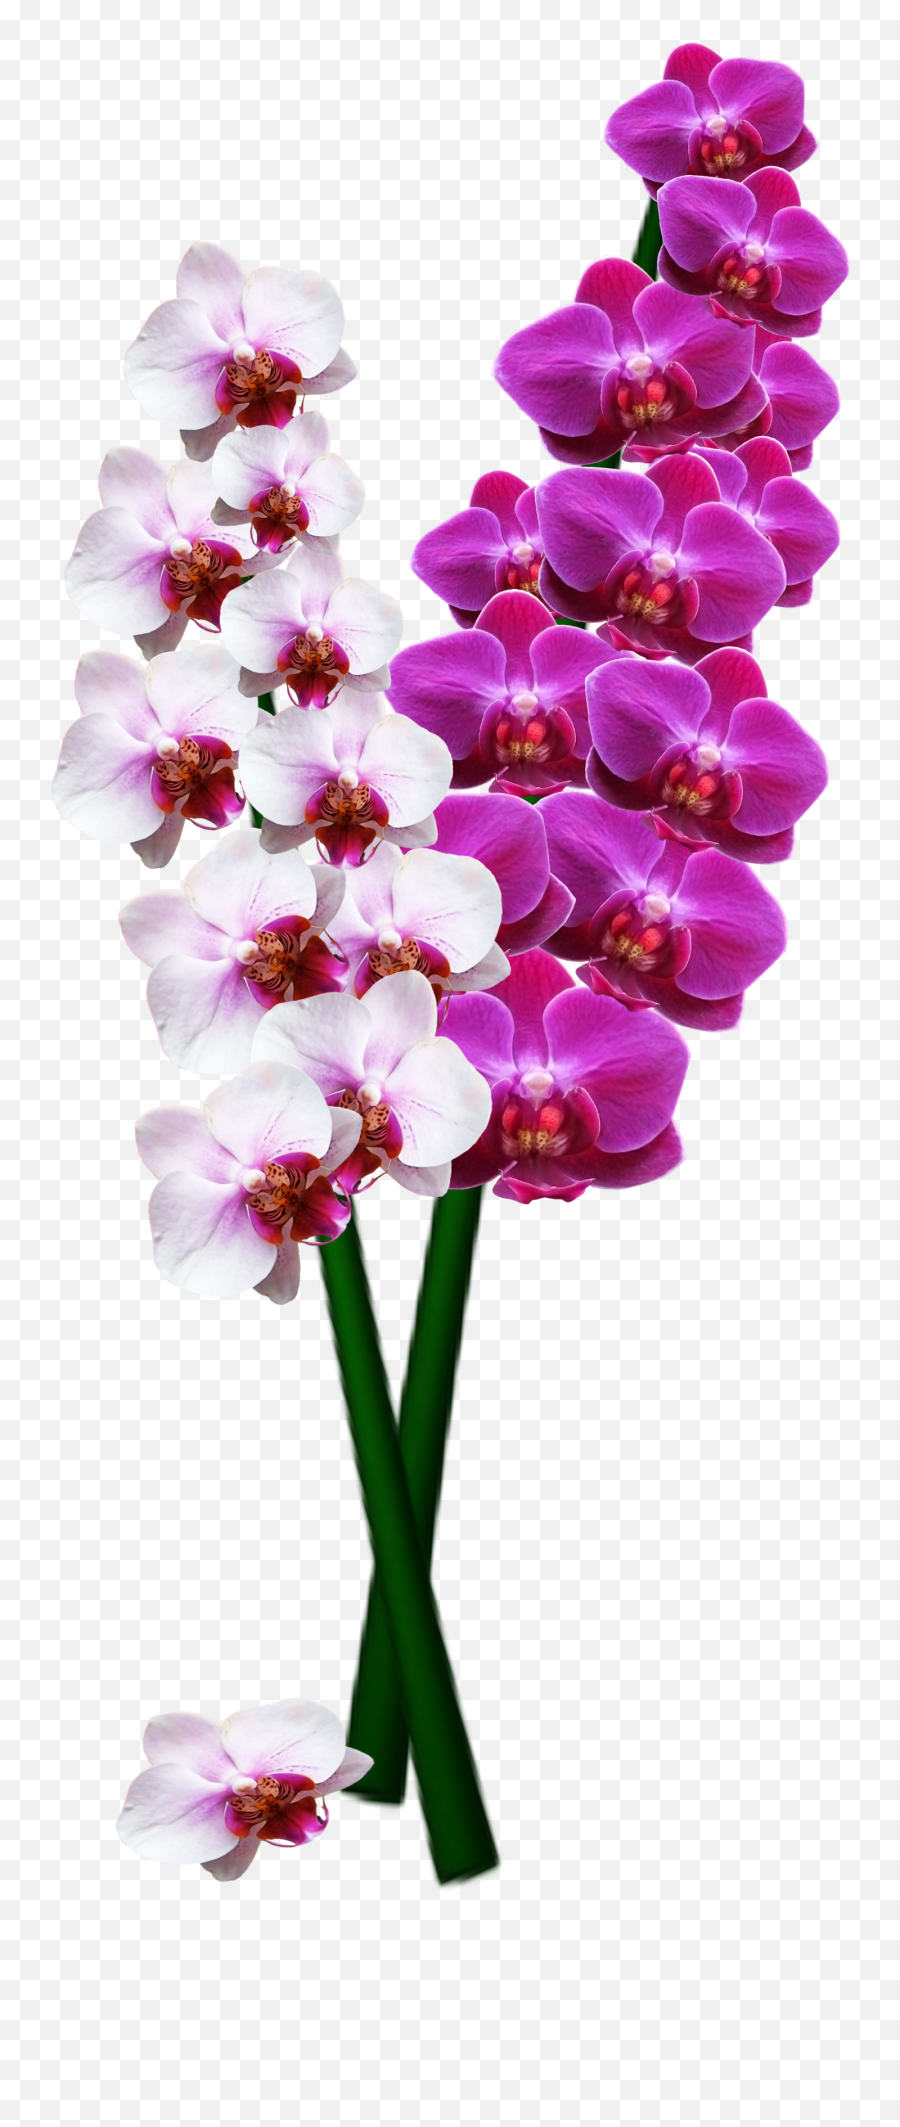 Download Orchid Png Image For Free - Transparent Orchids High Resolution,Orchid Png